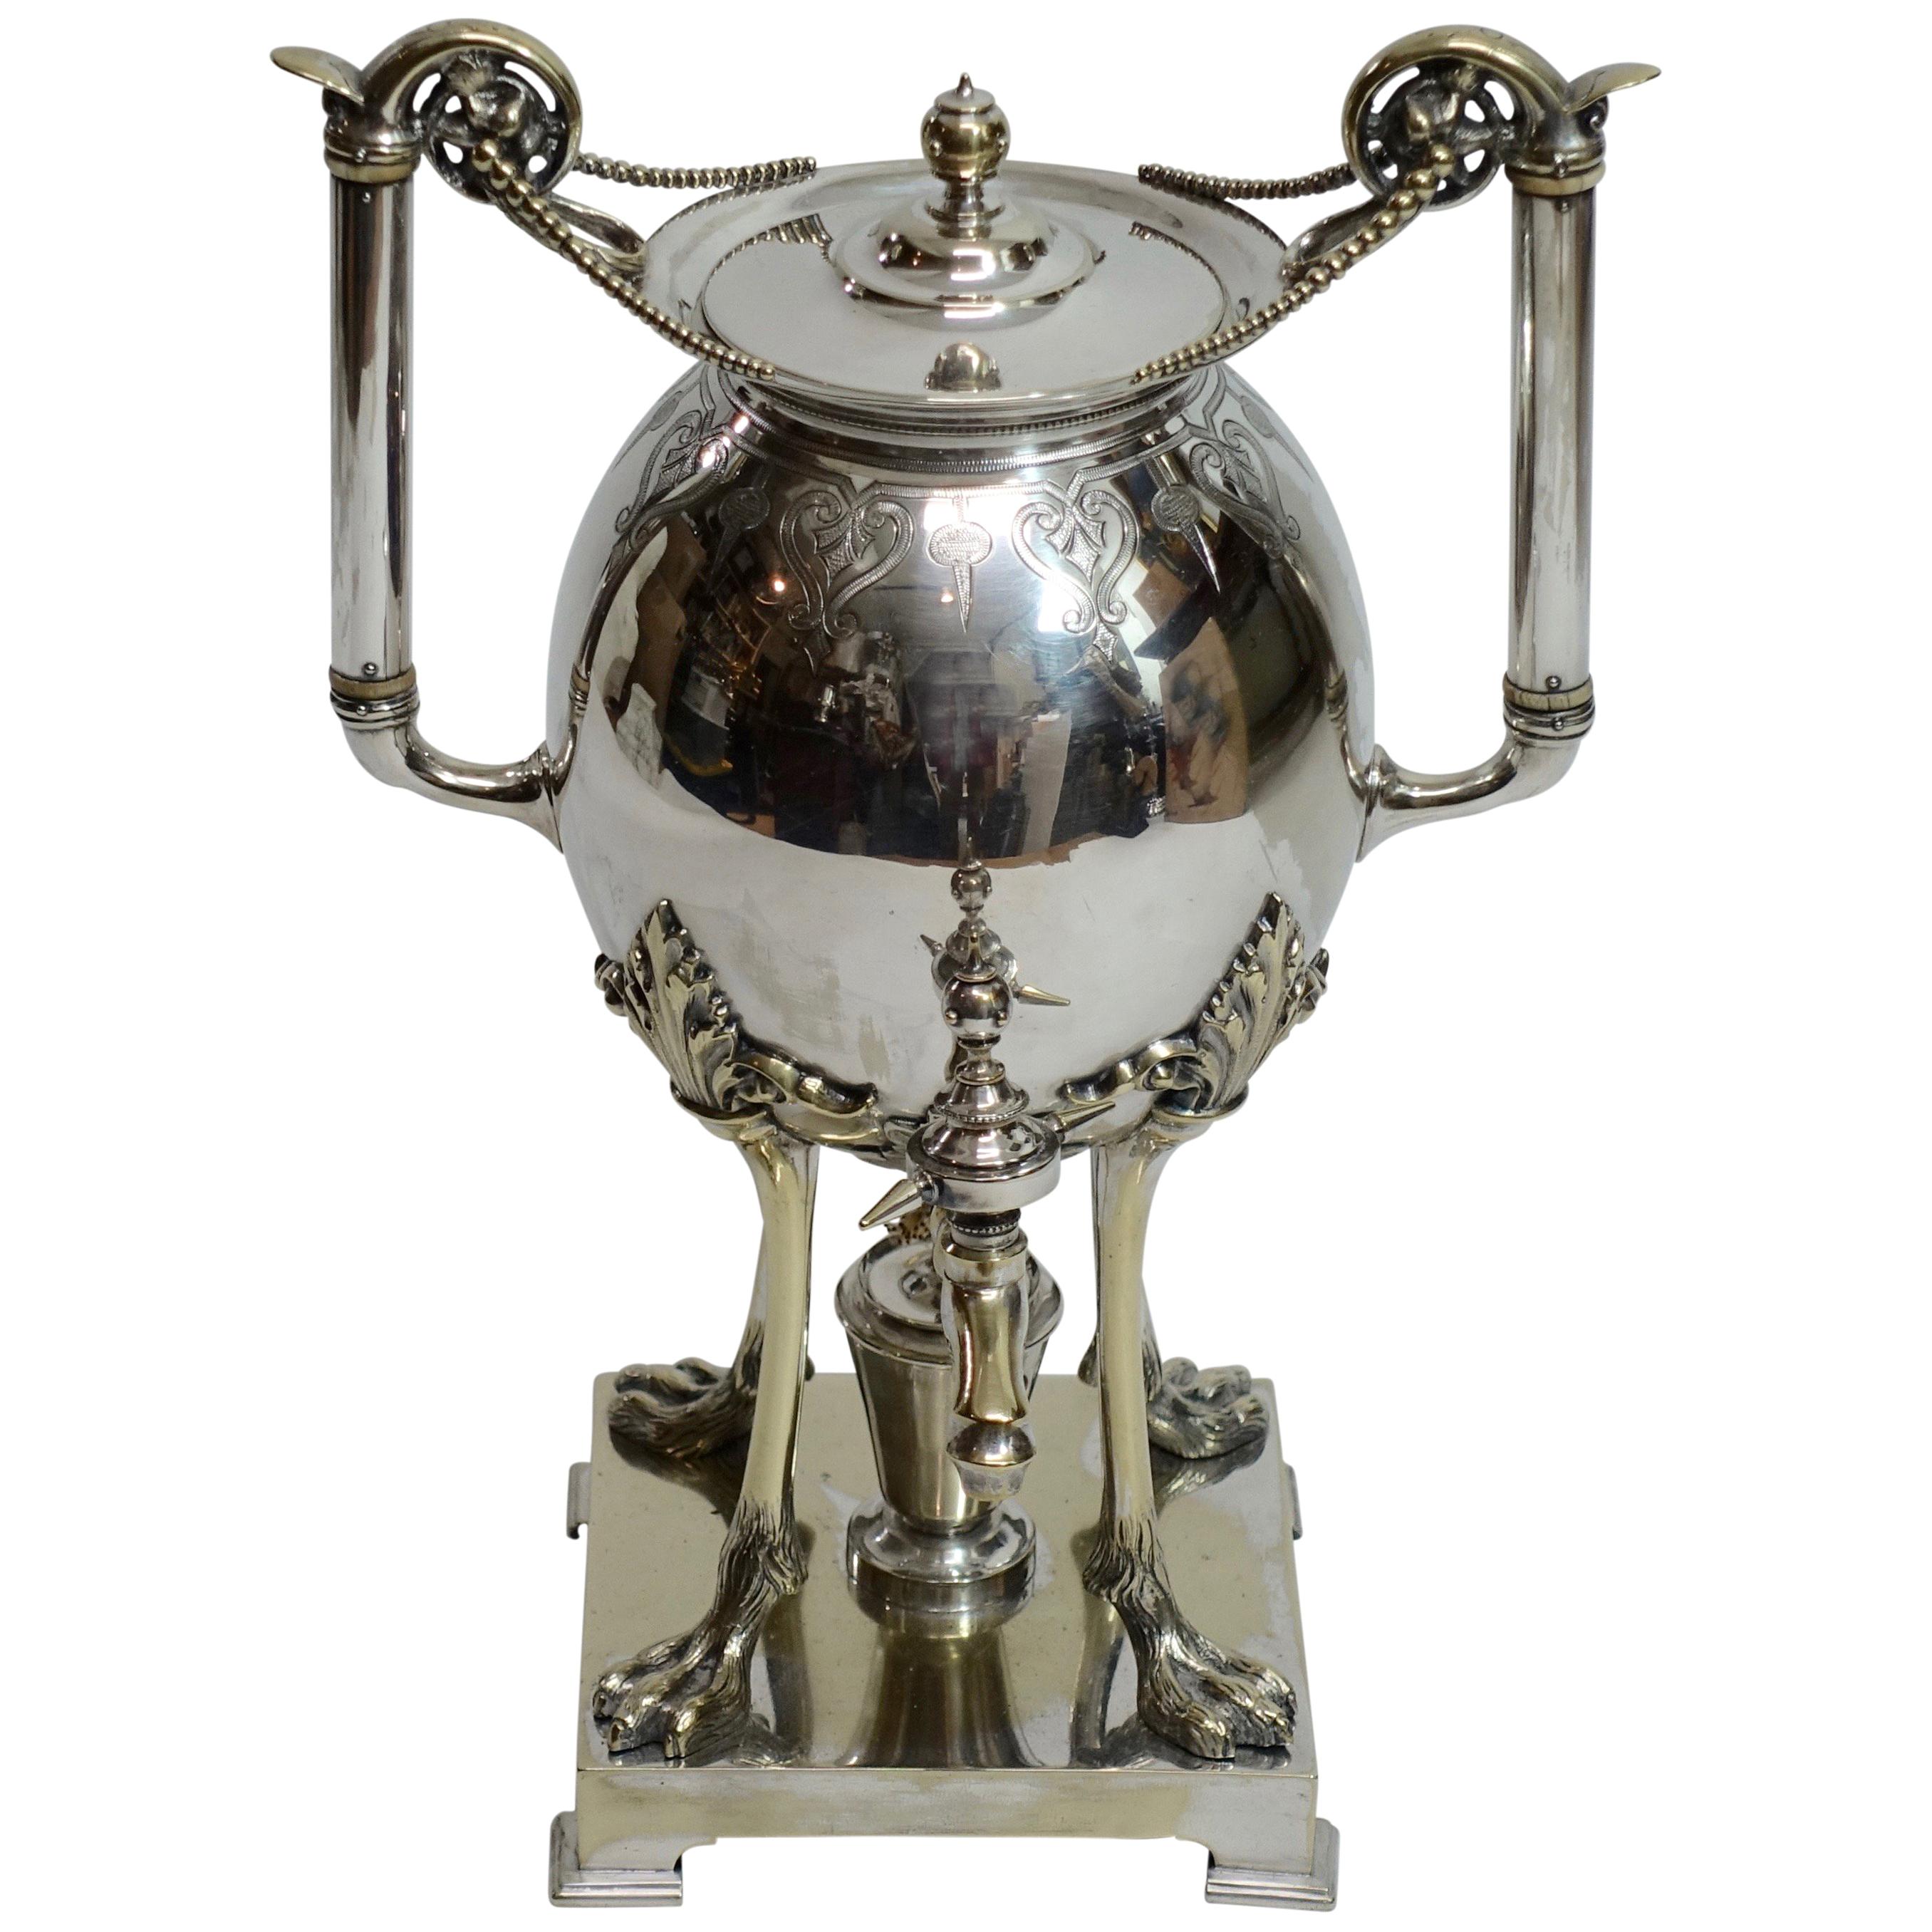 Silver Plate Aesthetic Movement Hot Water Urn Samovar, American 19th Century